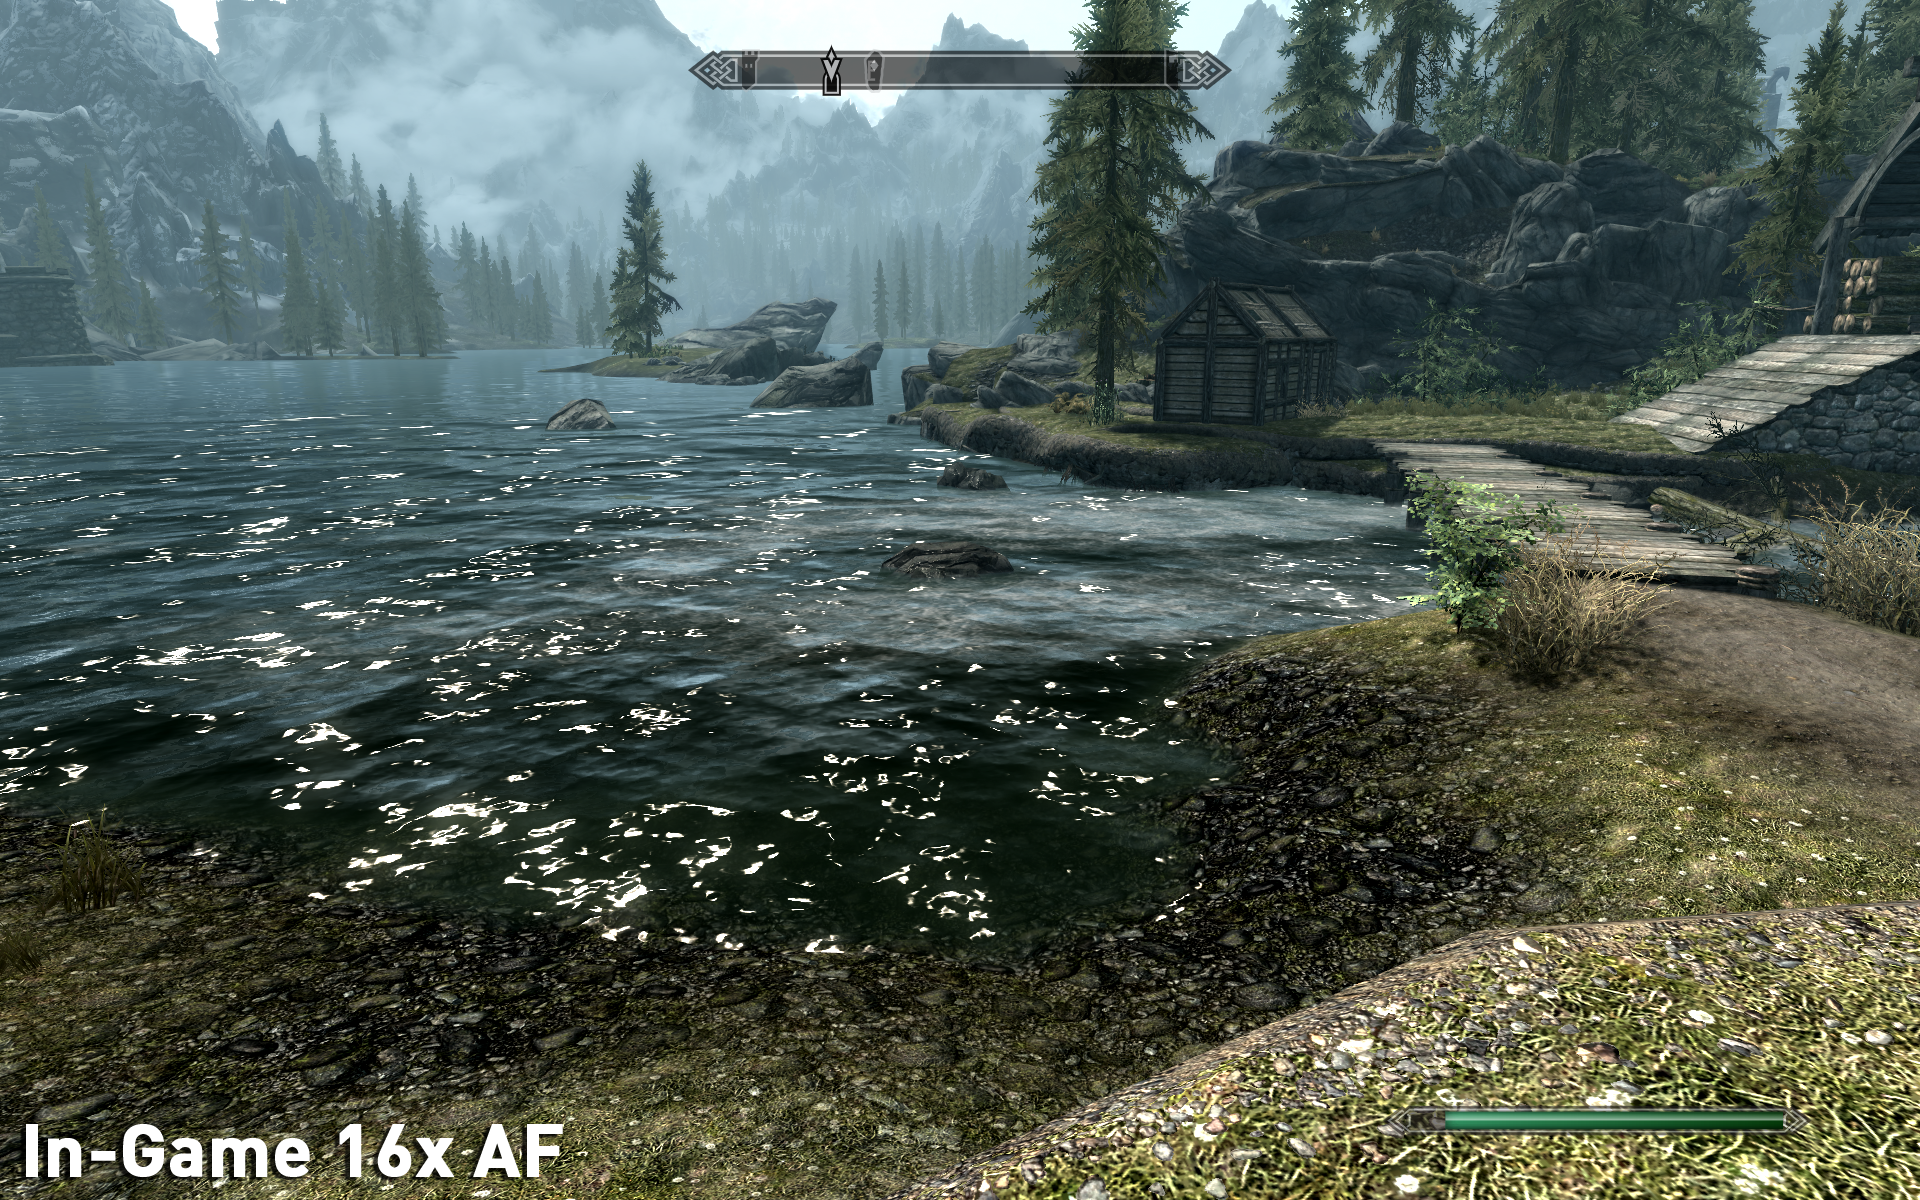 Media asset in full size related to 3dfxzone.it news item entitled as follows: NVIDIA pubblica The Elder Scrolls V: Skyrim Tweak Guide | Image Name: news16197_9.png